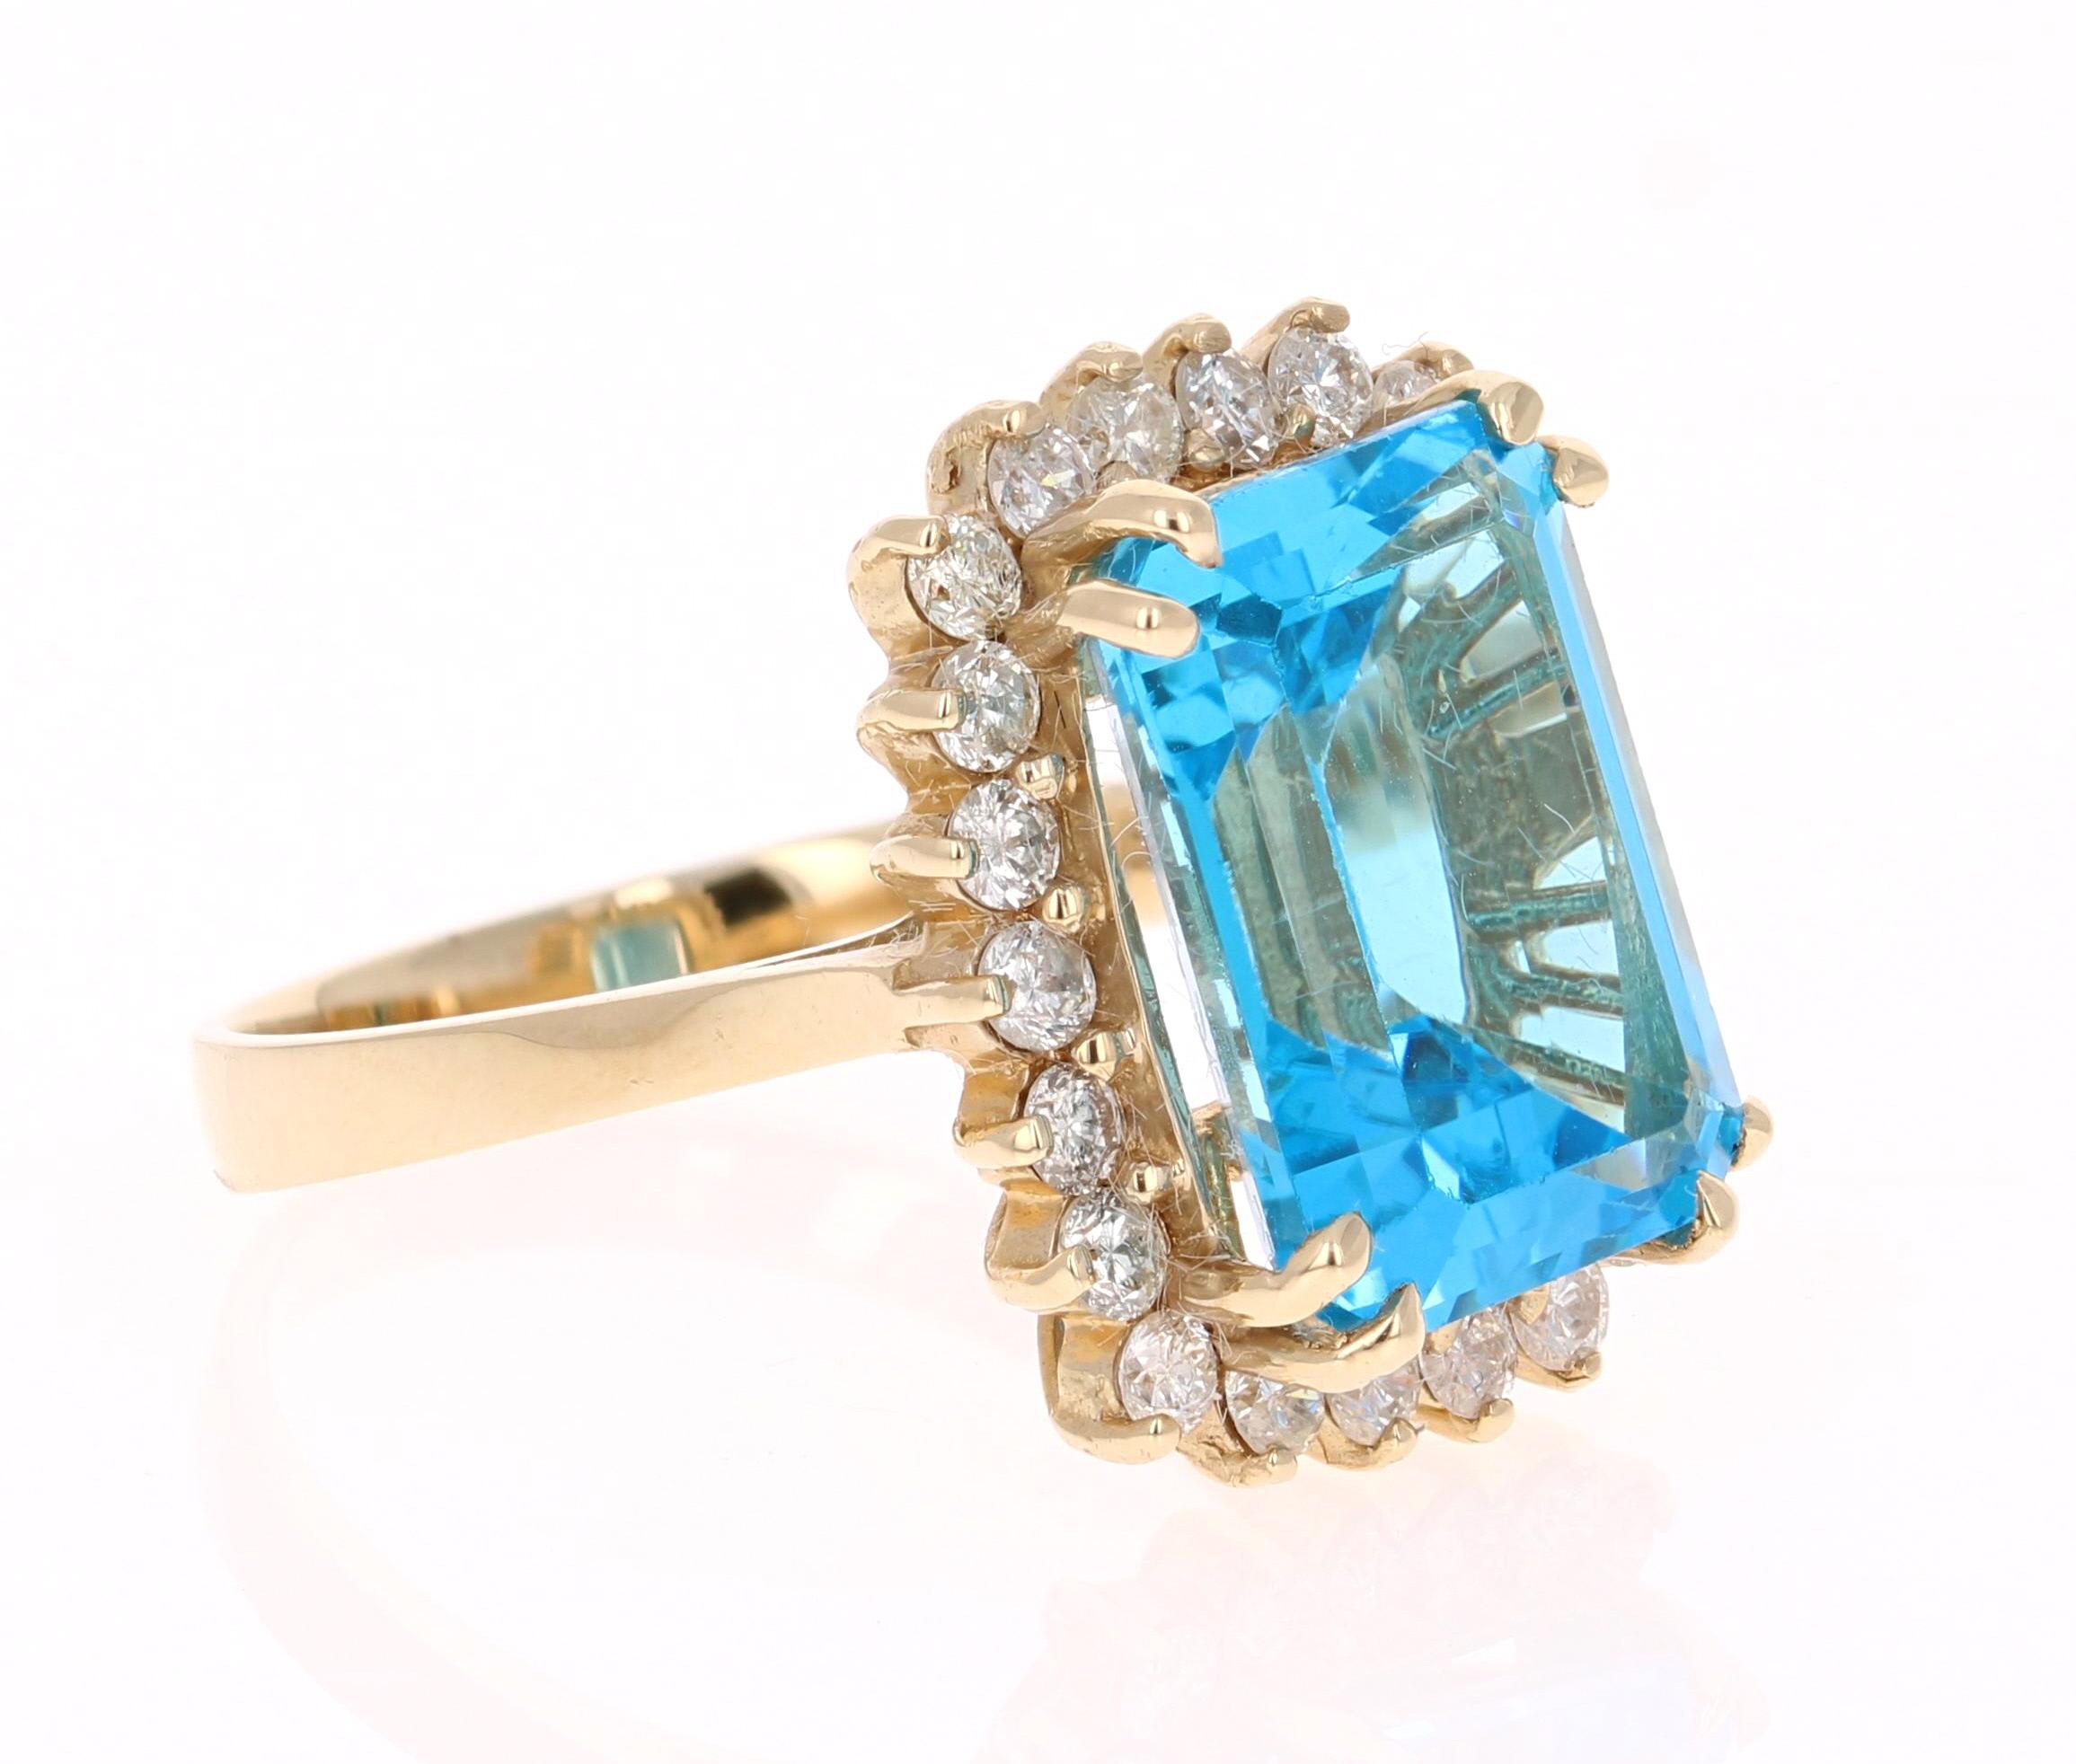 This beautiful Emerald cut Blue Topaz and Diamond ring has a stunning 9.39 carat Blue Topaz and its surrounded by 22 Round Cut Diamonds that weigh 0.89 carats. The total carat weight of the ring is 10.28 carats. 
The setting is crafted in 14K Yellow